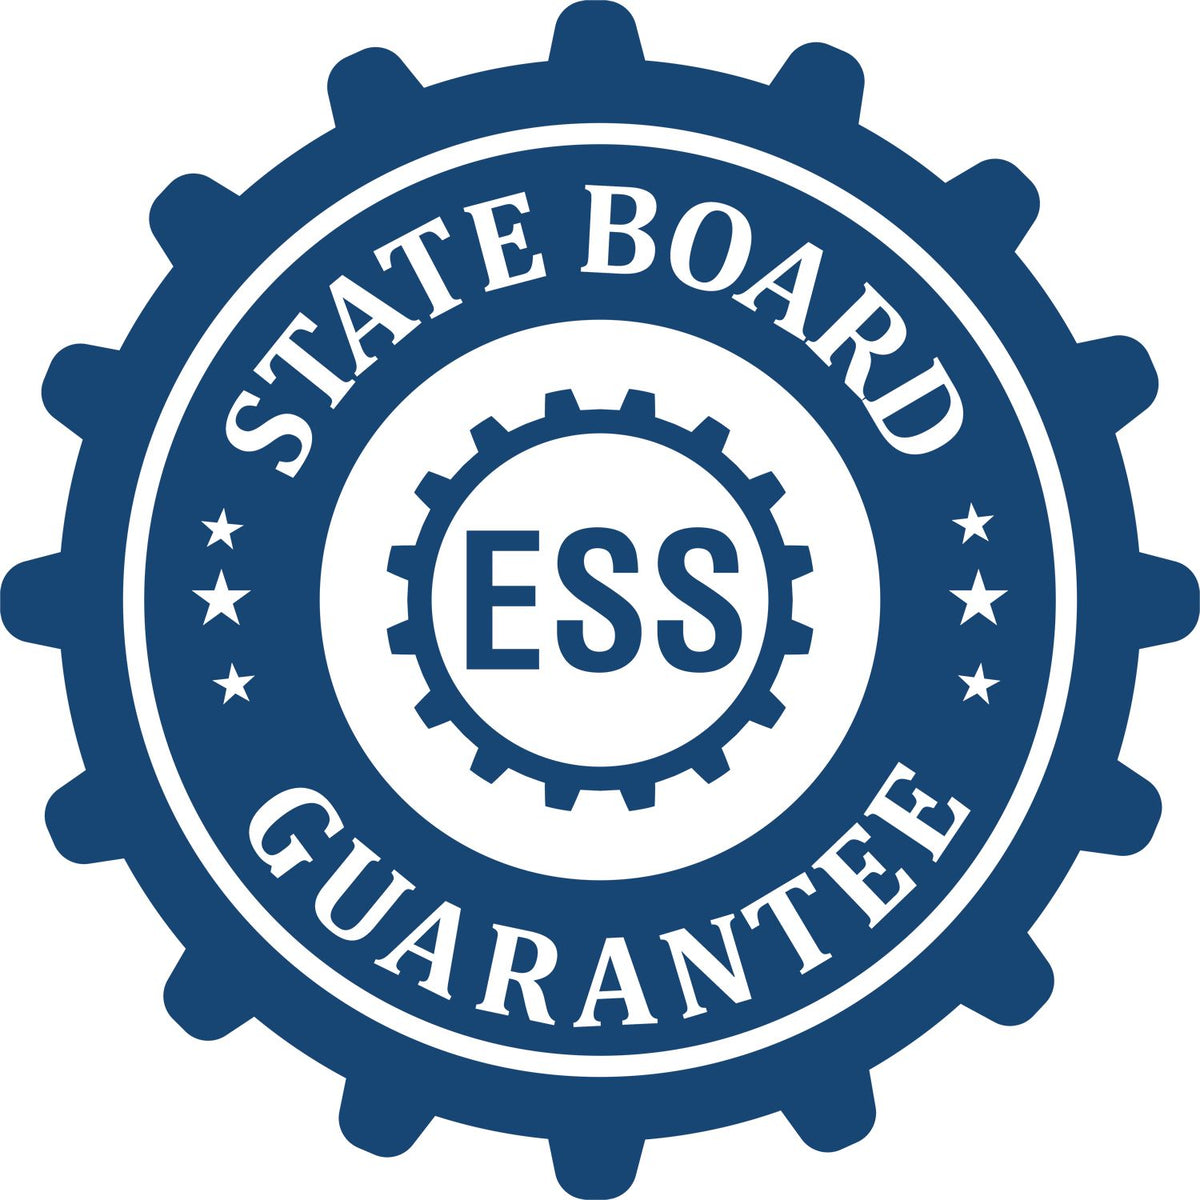 An emblem in a gear shape illustrating a state board guarantee for the Soft Colorado Professional Geologist Seal